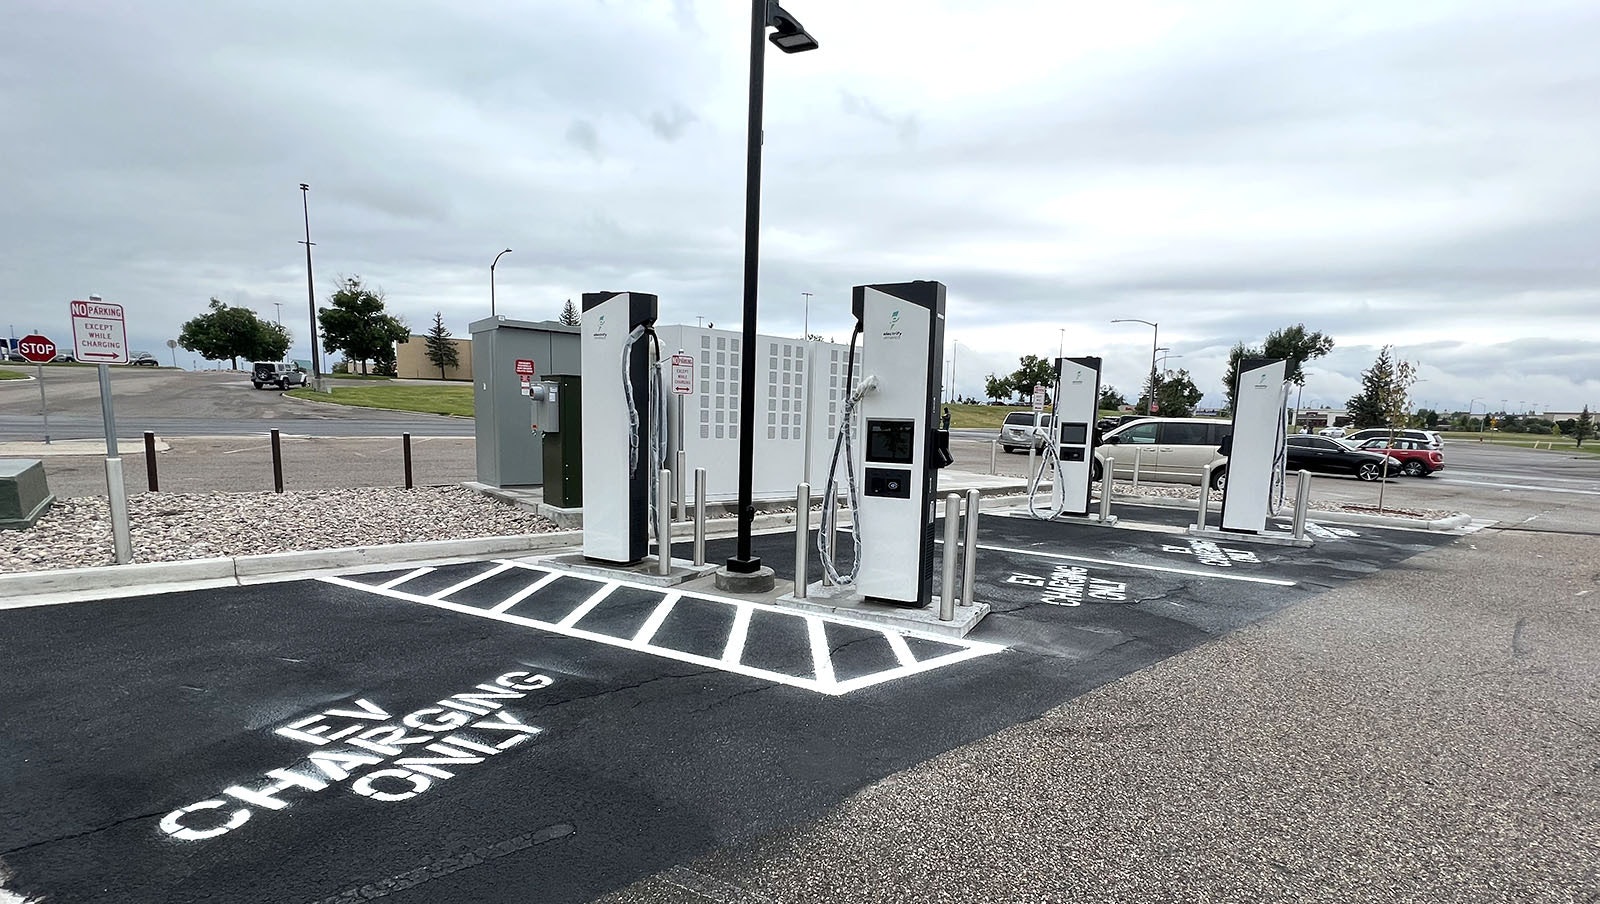 A new Electrify America charging station in the parking lot of the Target store in Cheyenne.